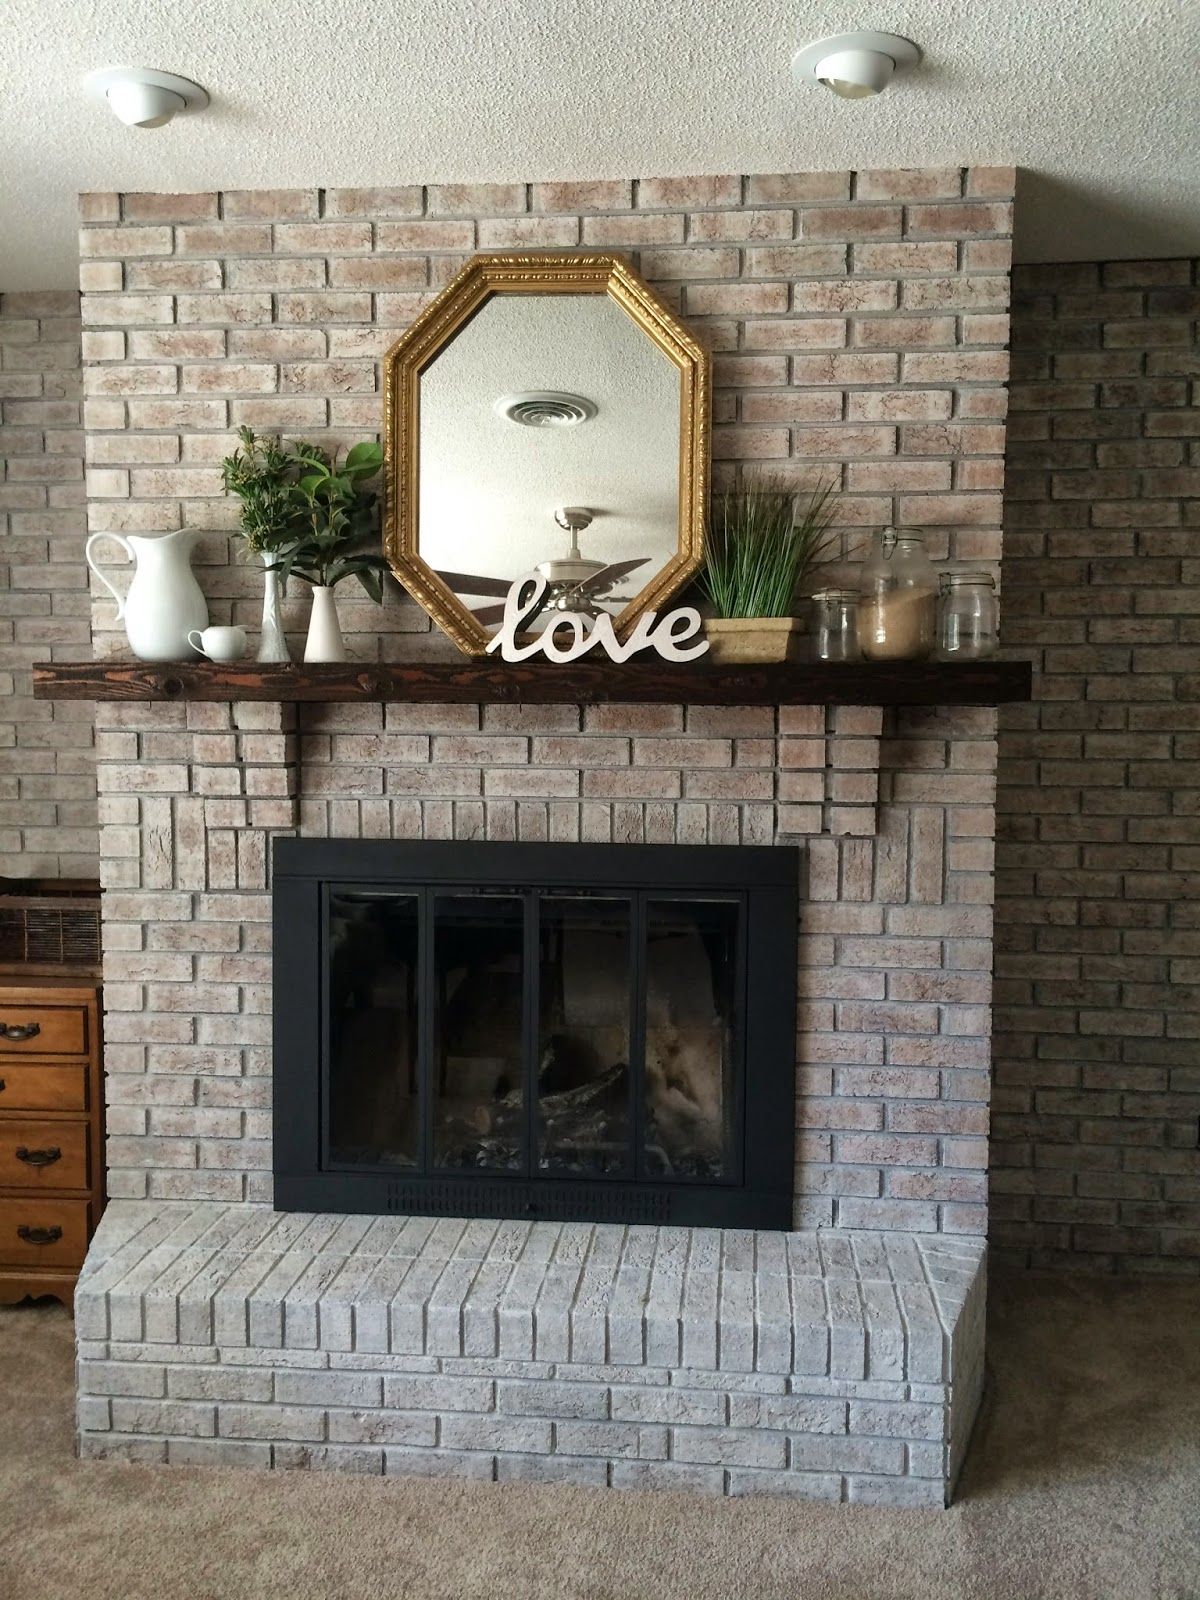 How to Remove Paint From Brick Fireplace New White Washing Brick with Gray Beige Walking with Dancers